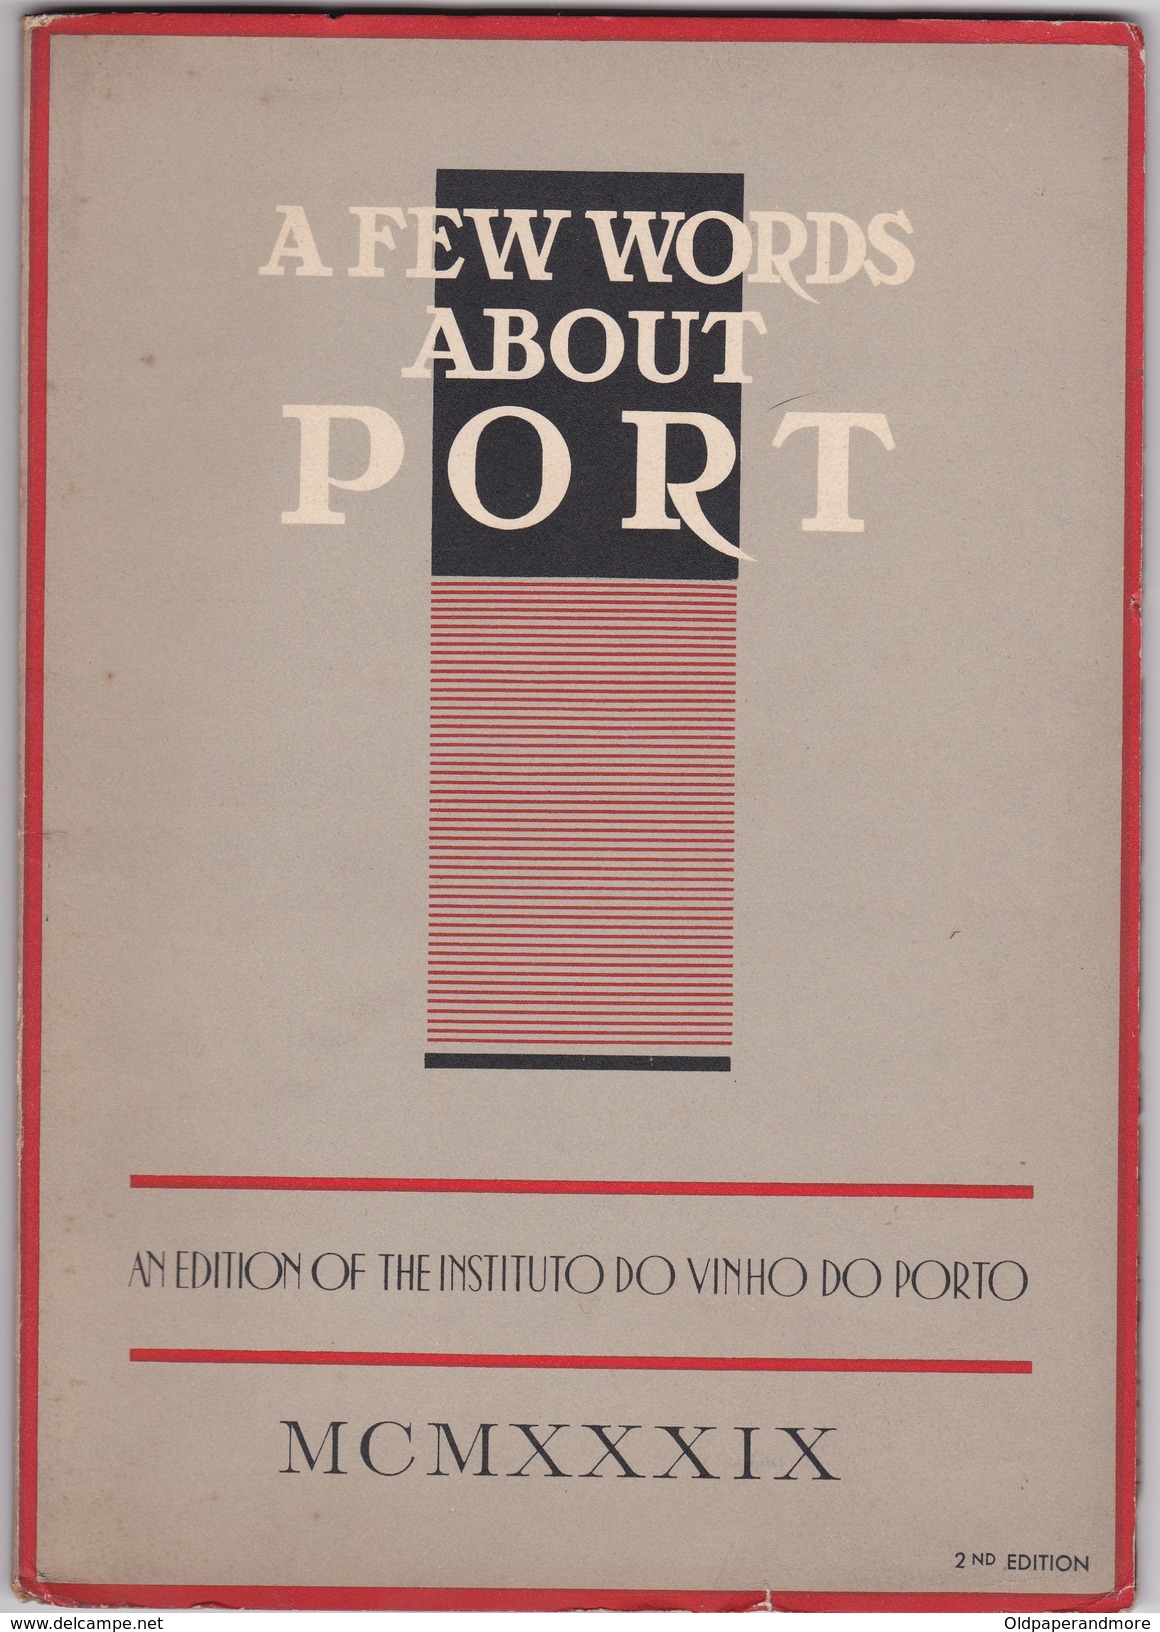 PORTUGAL - A FEW WORDS ABOUT PORT - AN EDITION OF THE INSTITUTO DO VINHO DO PORTO 1939 - WINE - VINO - 2nd EDITION - European